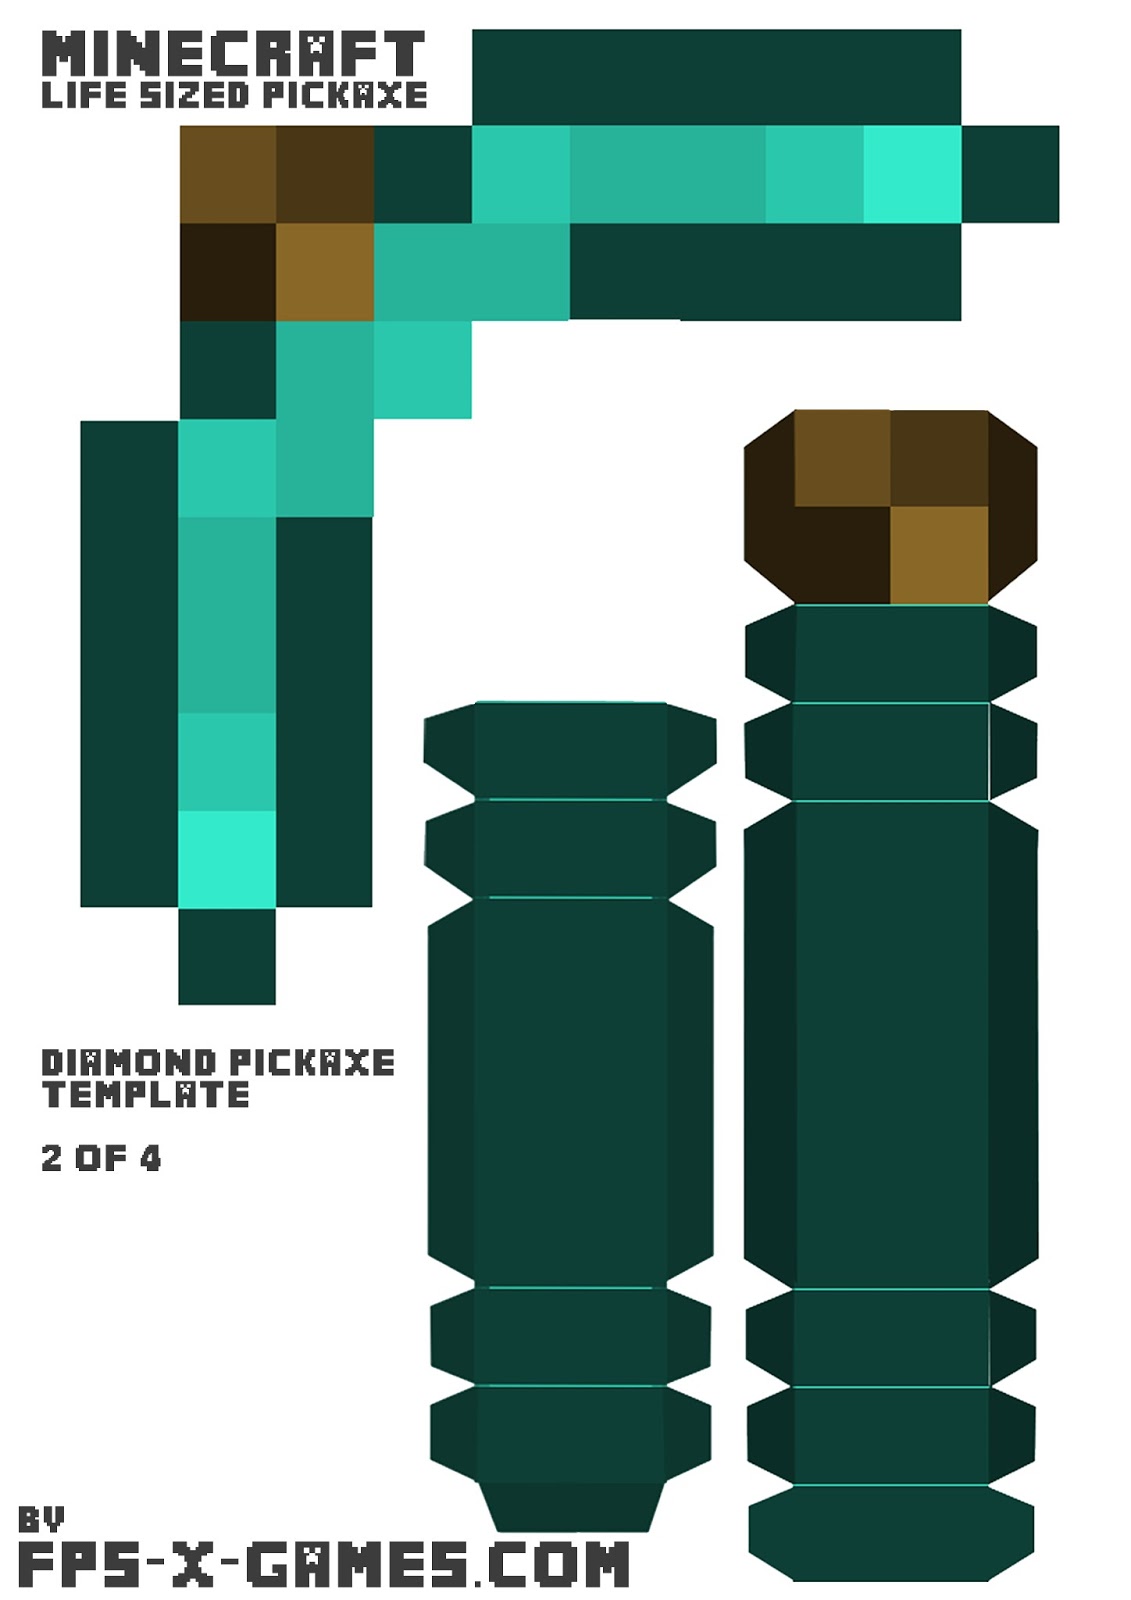 2 template papercraft diamond  papercraft pickaxe print zombie 4 printable out minecraft of Minecraft